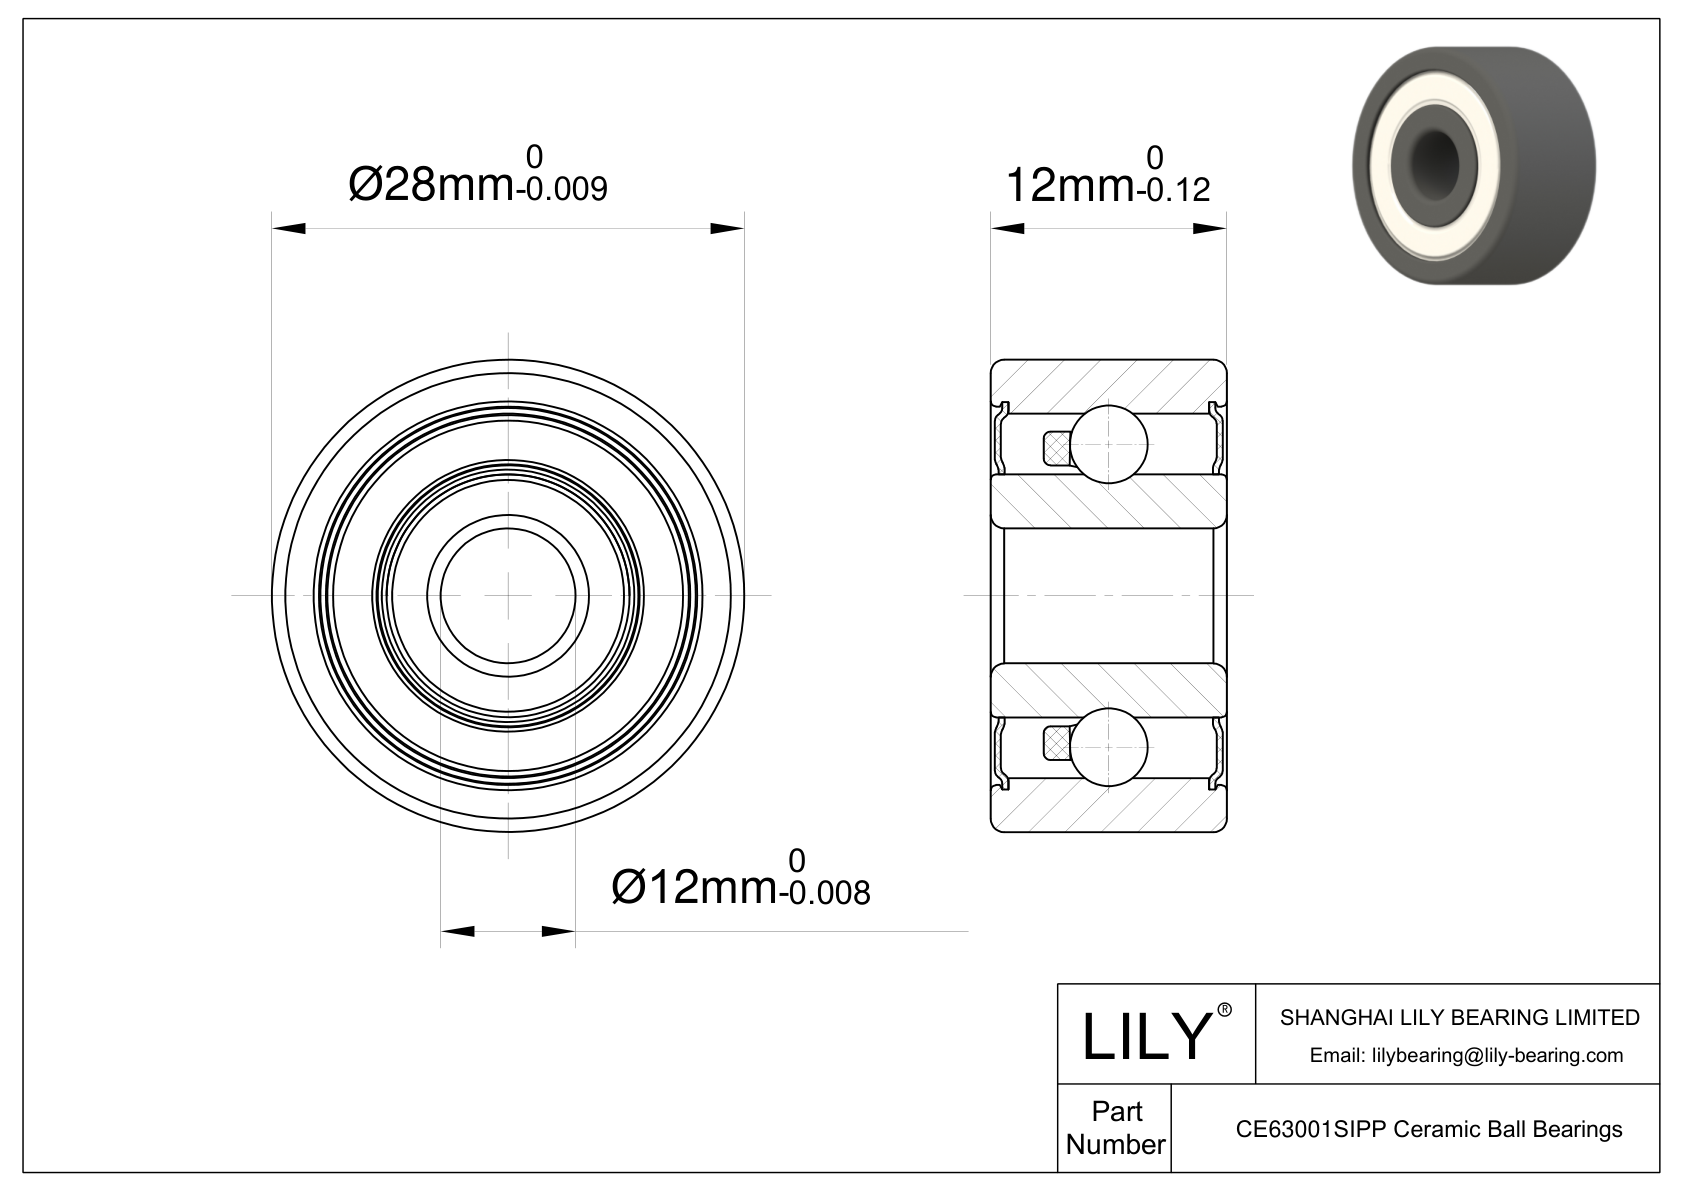 CESI 63001 2RS Metric Size Silicon Nitride Ceramic Bearings cad drawing